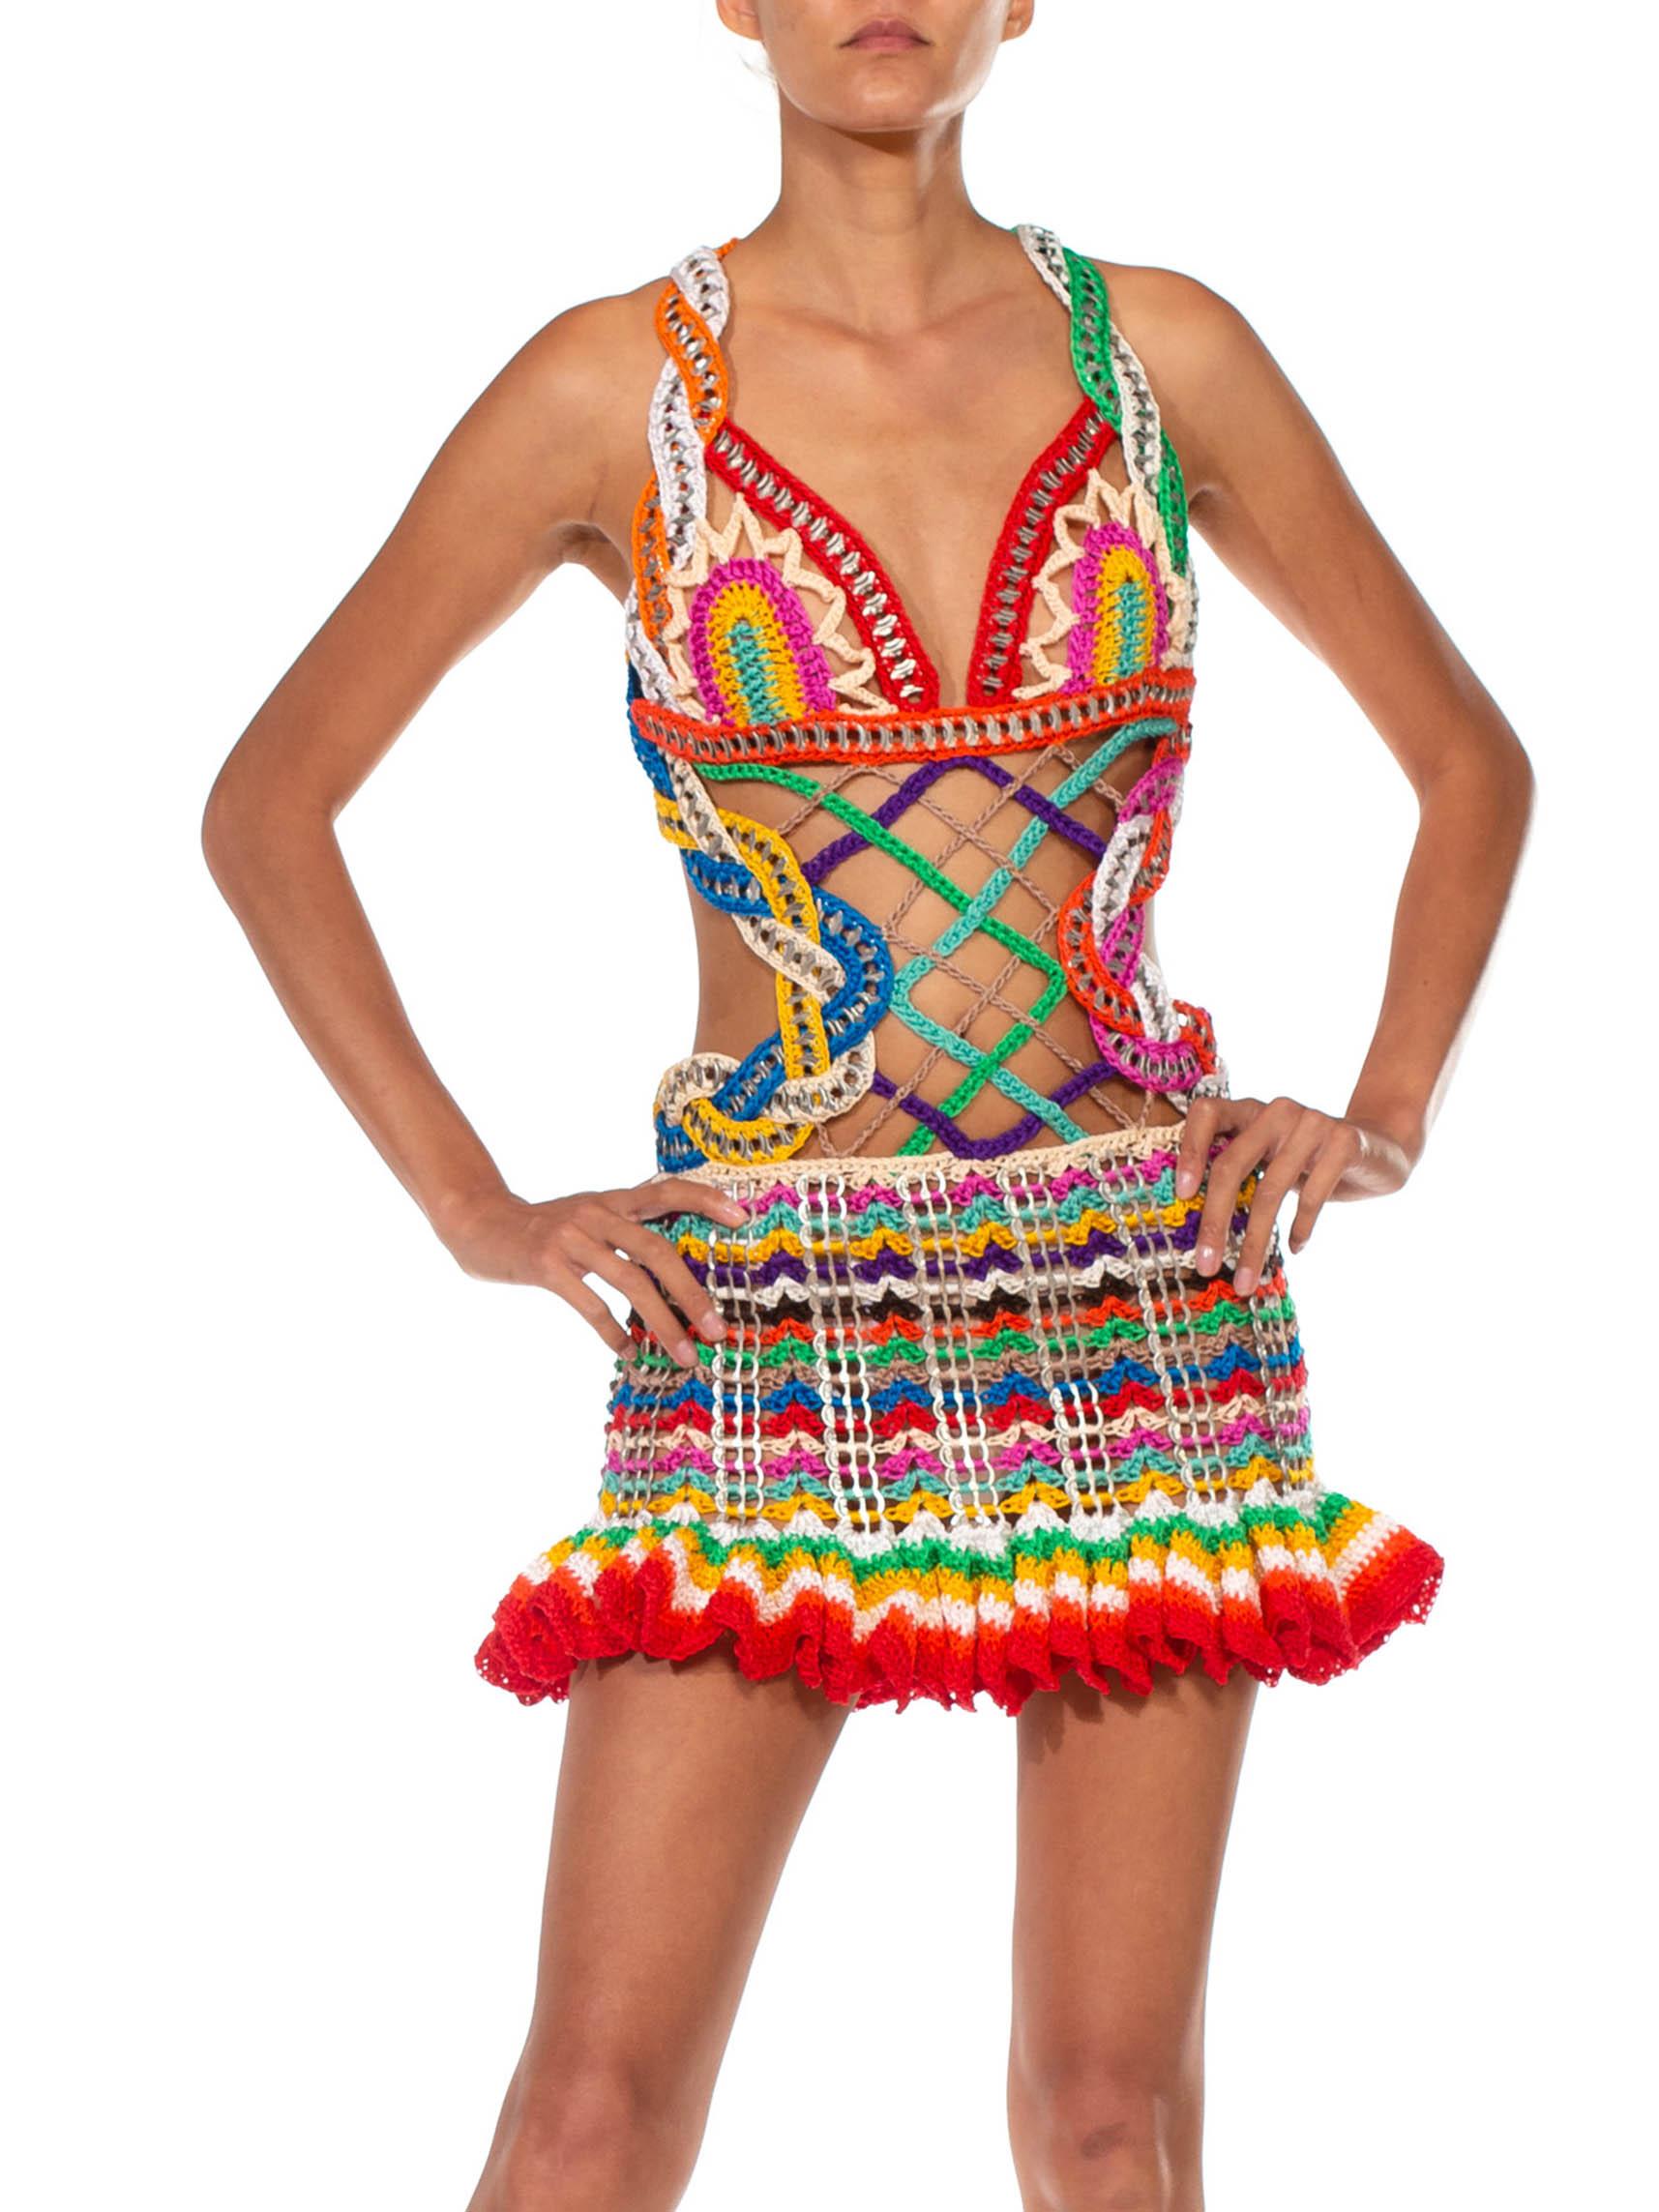 MORPHEW COLLECTION Rainbow Nylon &Metal Handmade Crocheted Dress In Excellent Condition For Sale In New York, NY